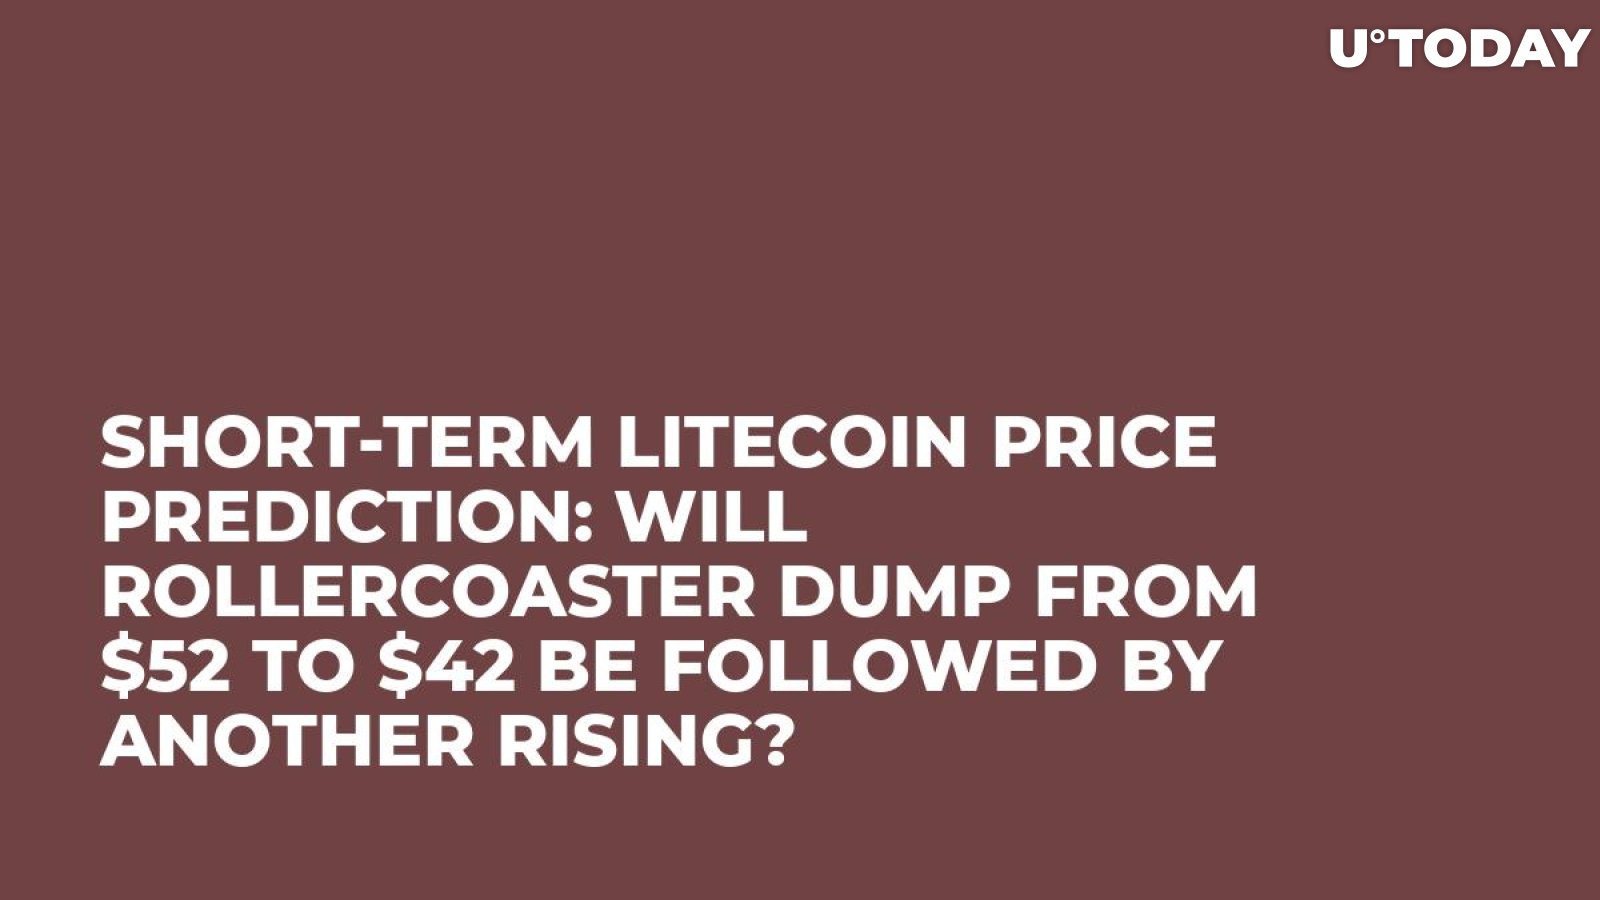 Short-Term Litecoin Price Prediction: Will Rollercoaster Dump from $52 to $42 Be Followed by Another Rising?